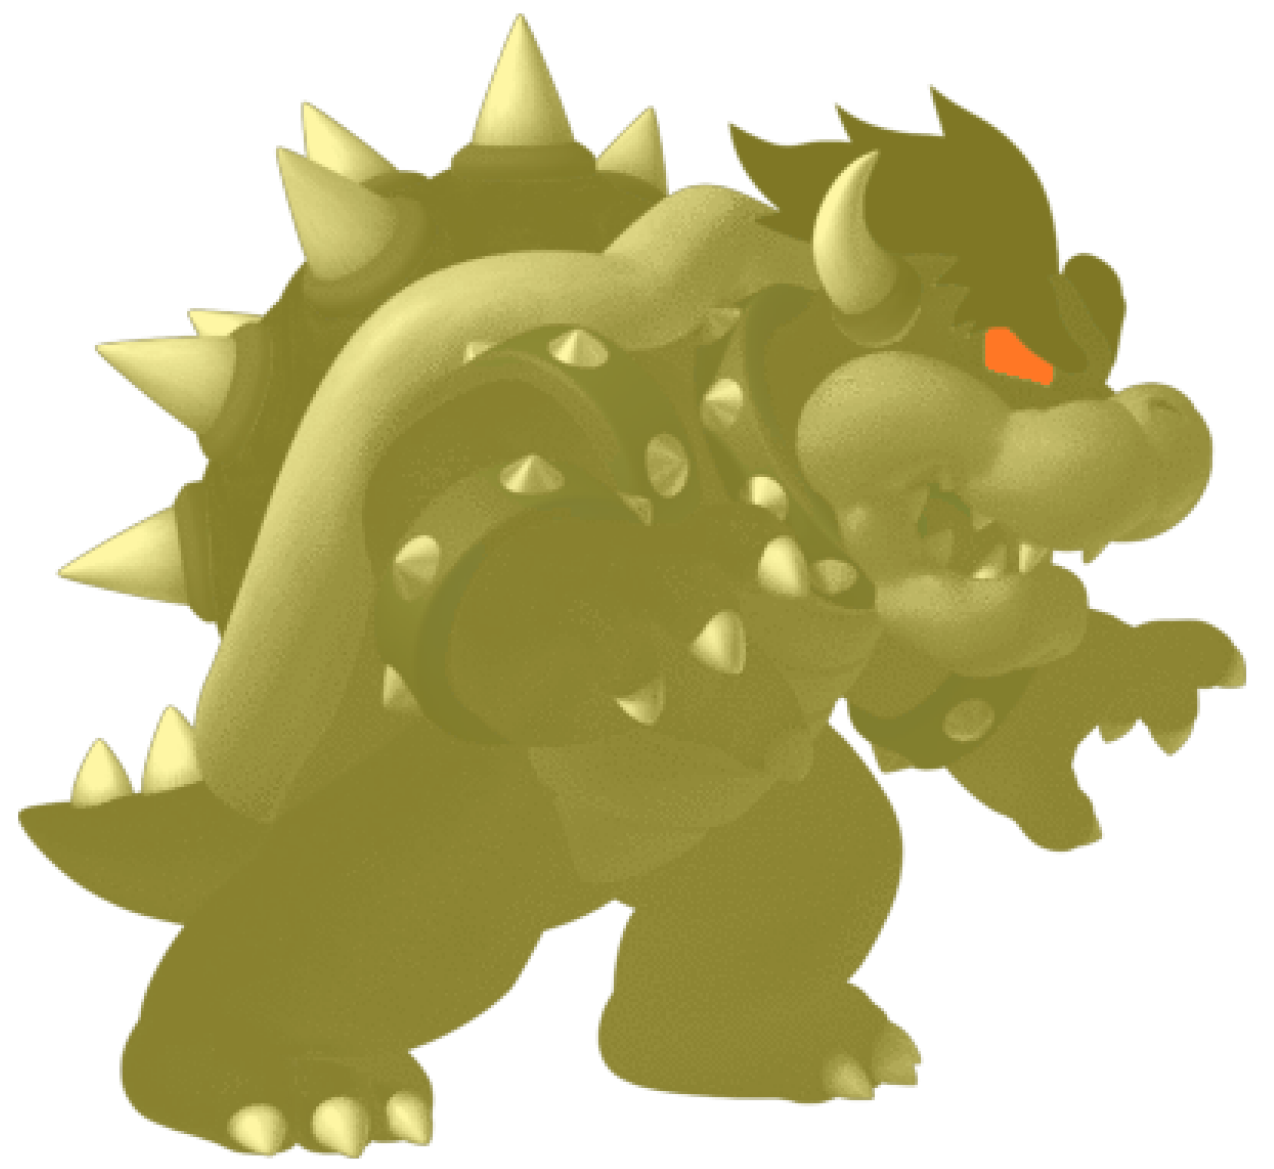 Dark Dry Bowser, Bowser Double 7 Wiki